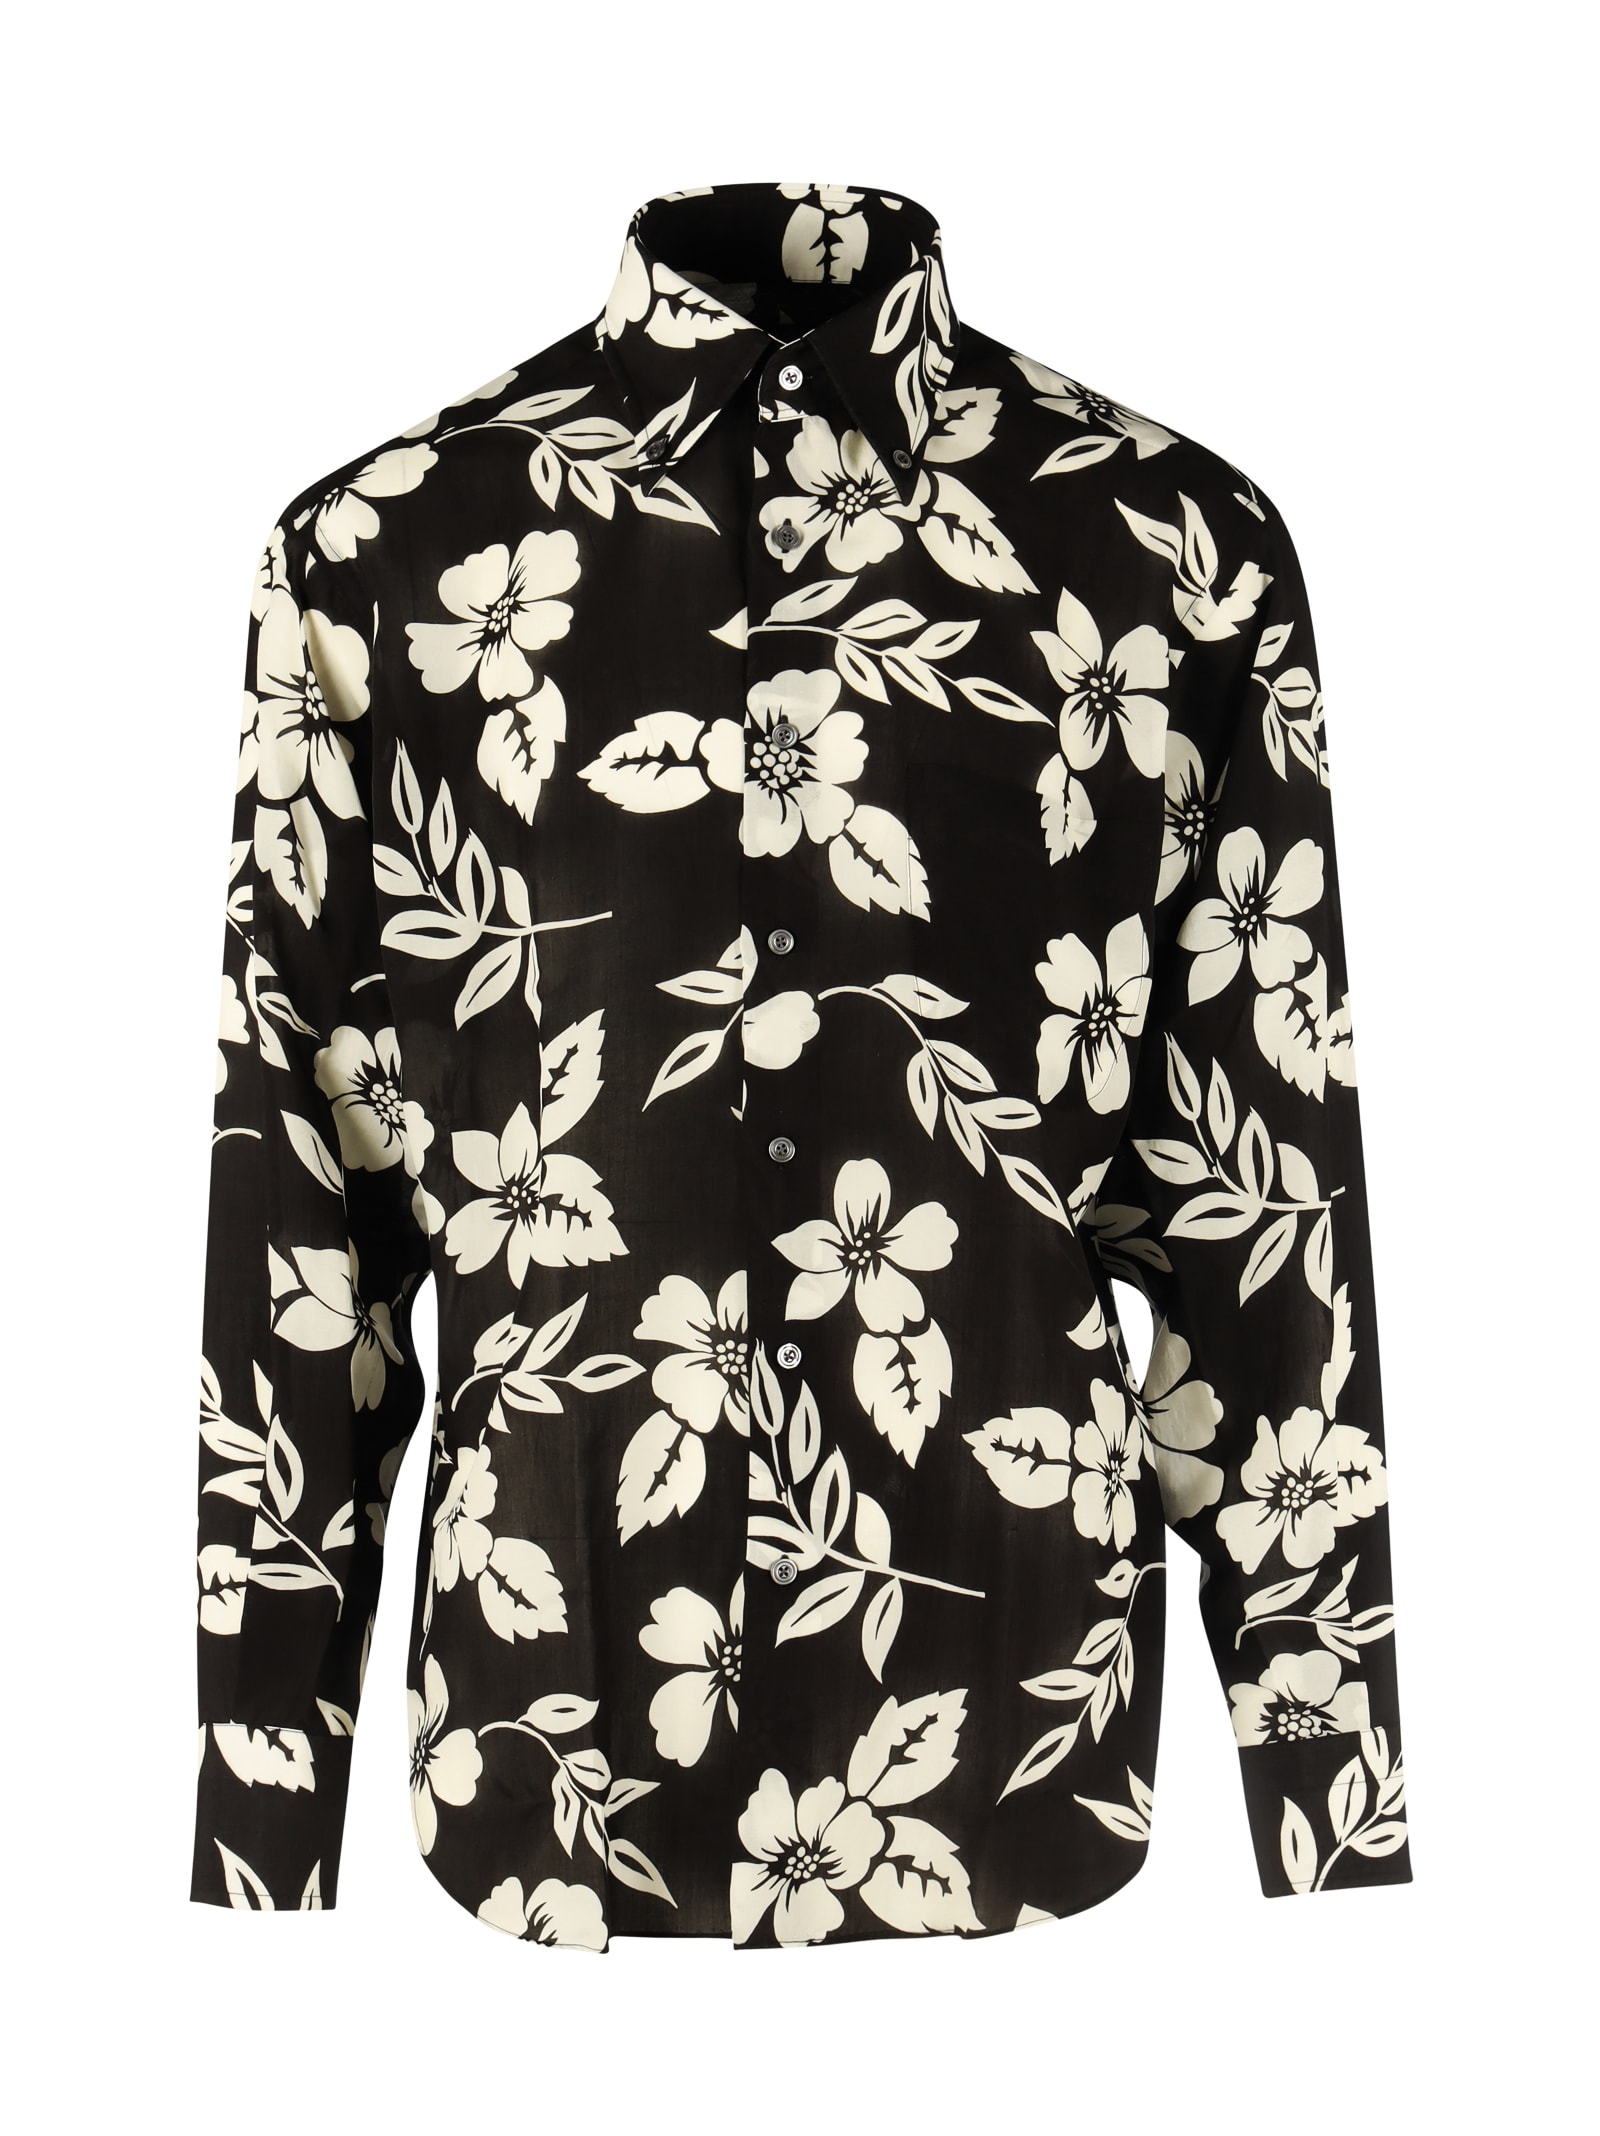 Tom Ford Graphic Floral Printed Shirt